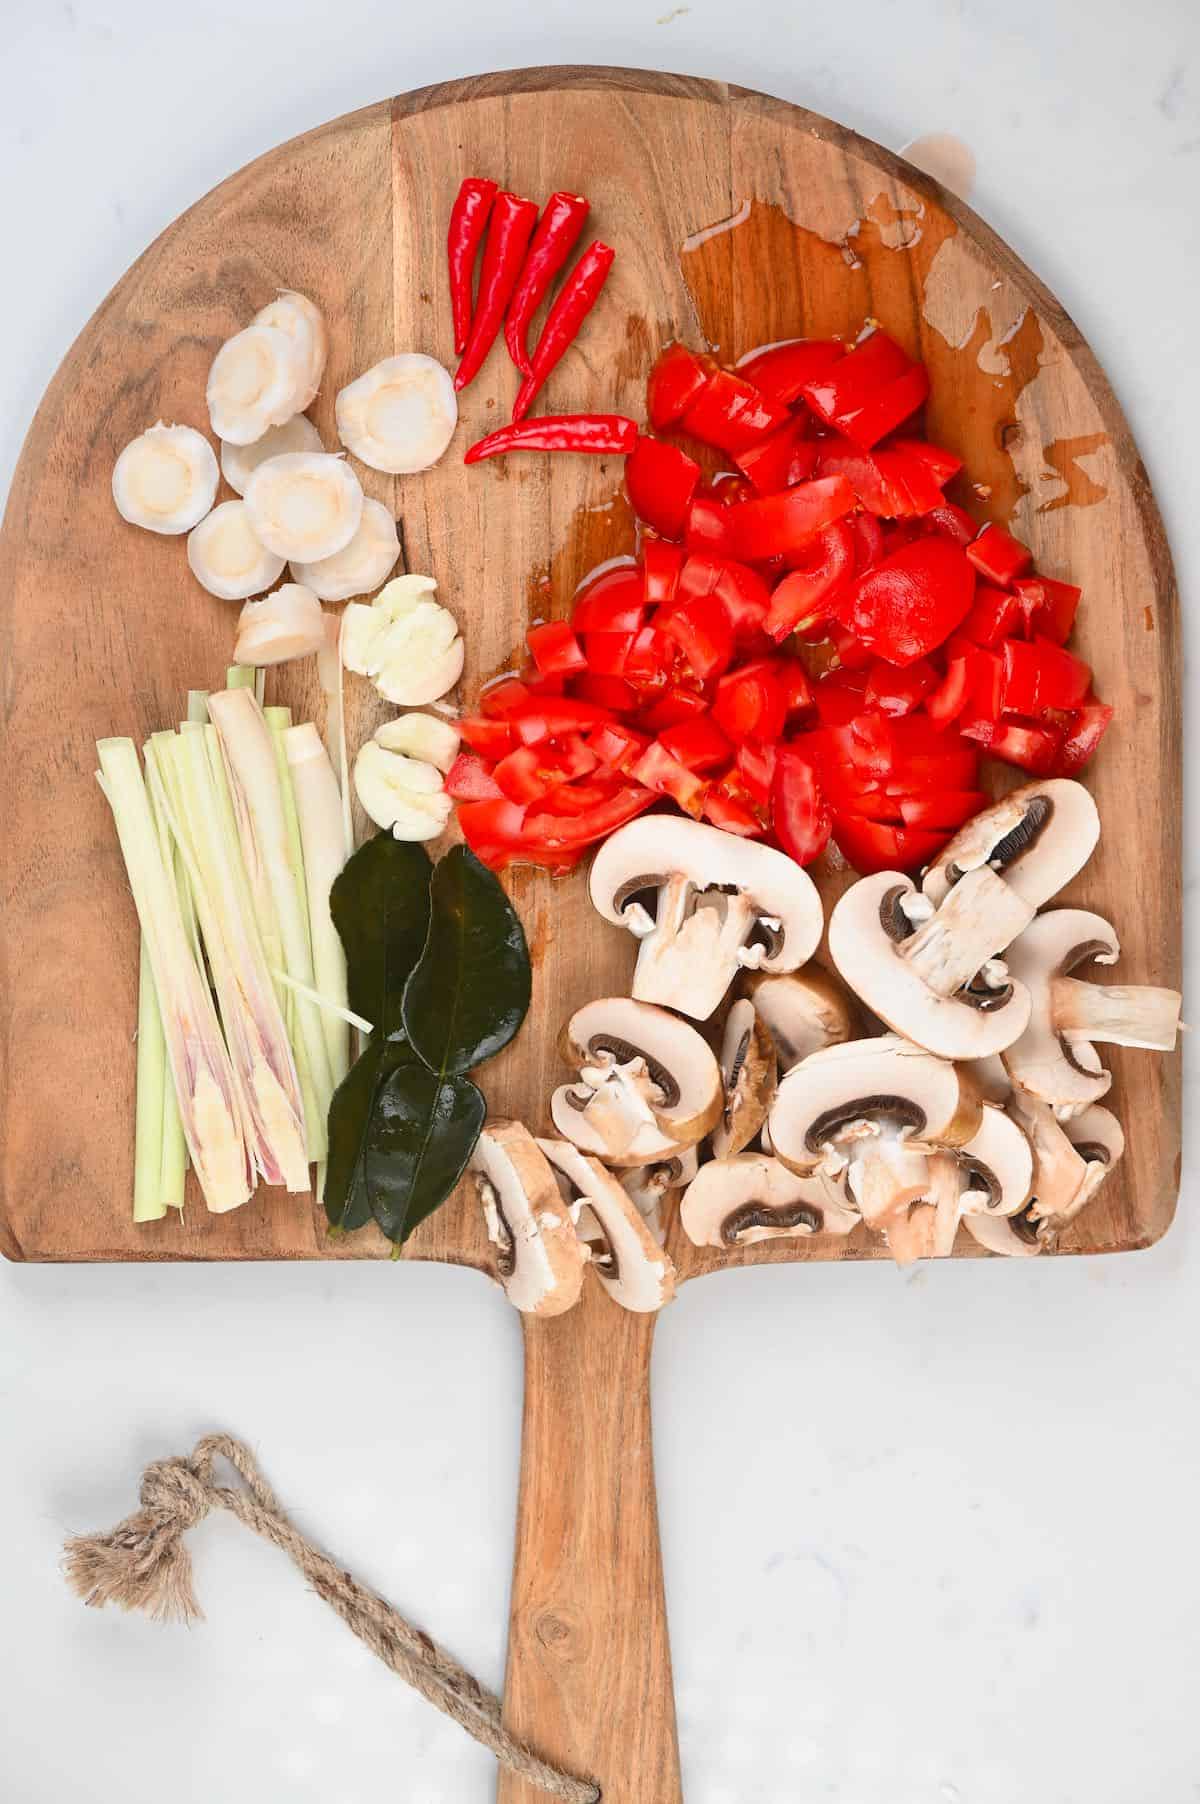 Chopped ingredients for tom yum soup